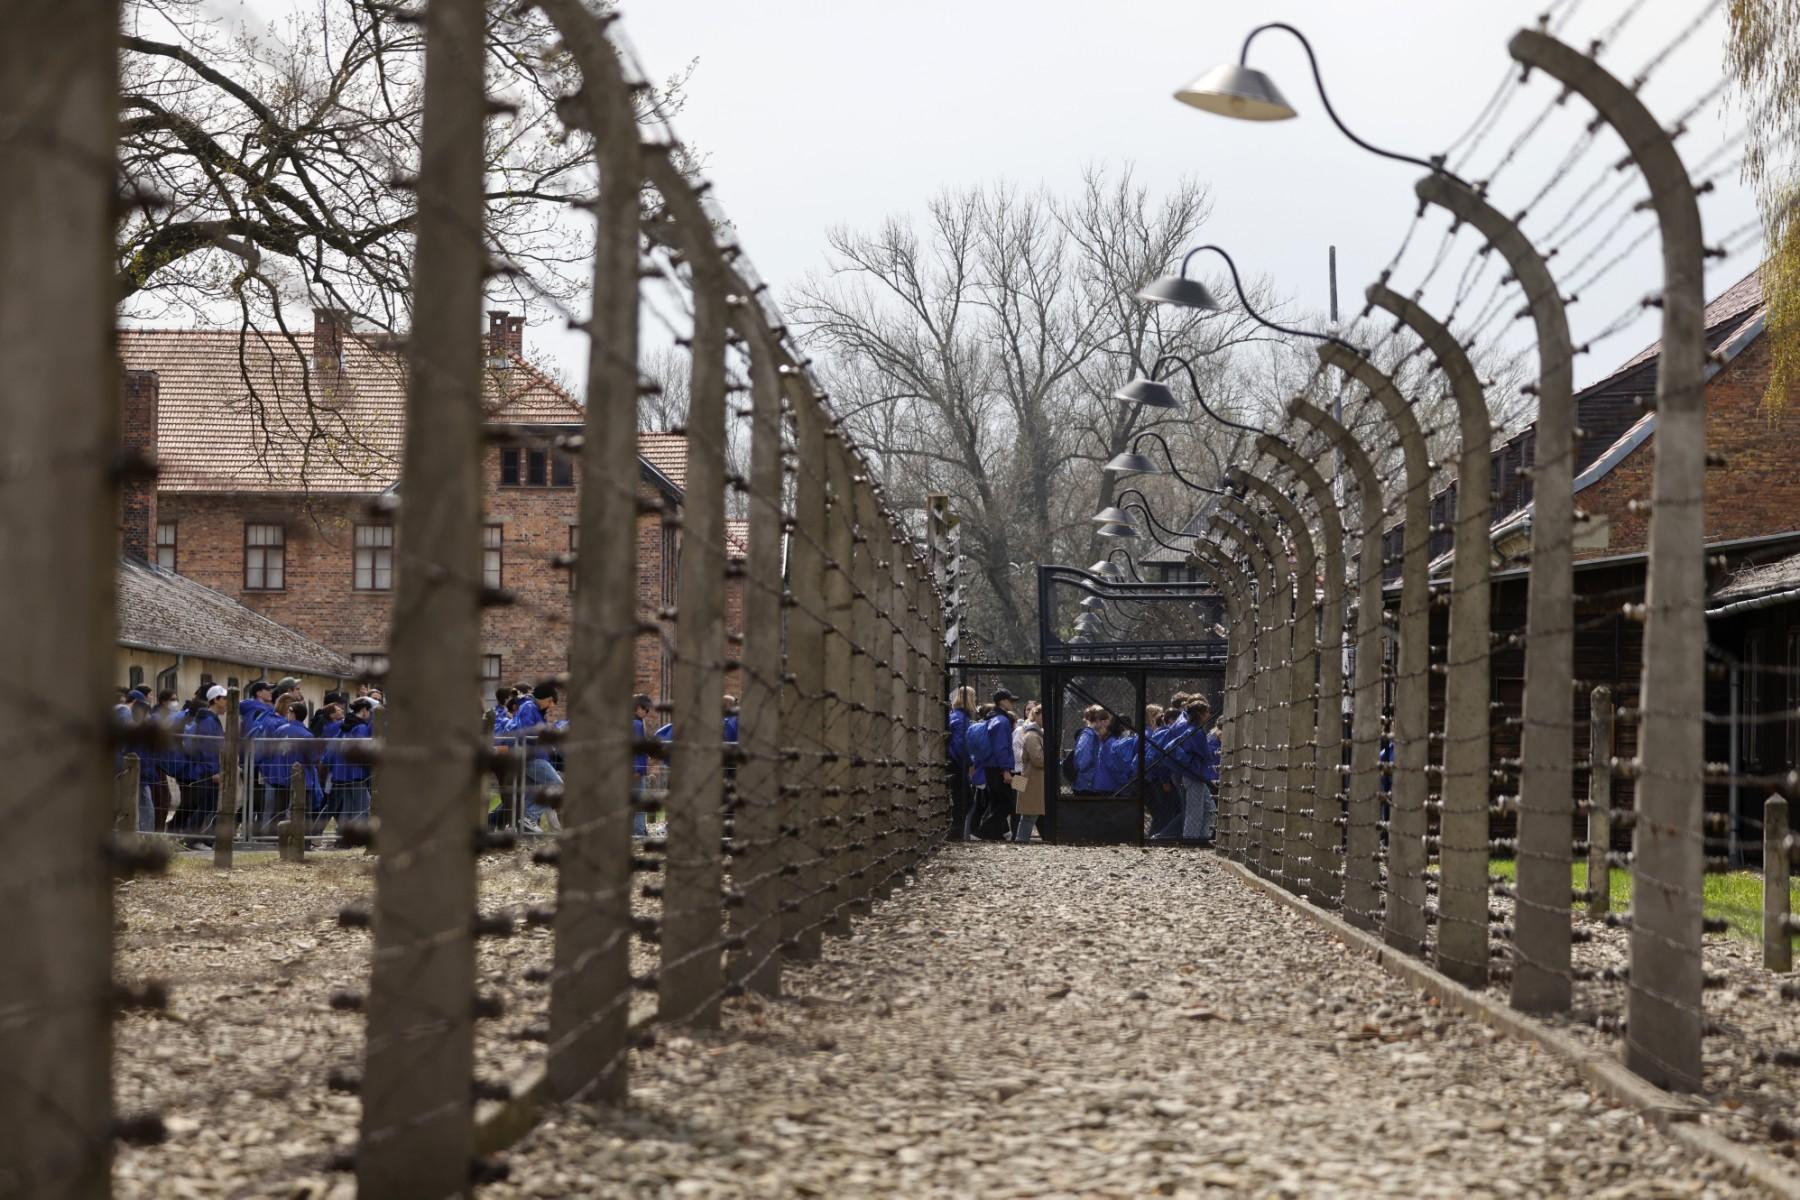 Participants walk past fences of the former Auschwitz-Birkenau camp during The March of the Living to honour the victims of the Holocaust, at the site of the Memorial and Museum Auschwitz-Birkenau in Oswiecim, Poland on April 28. Photo: AFP